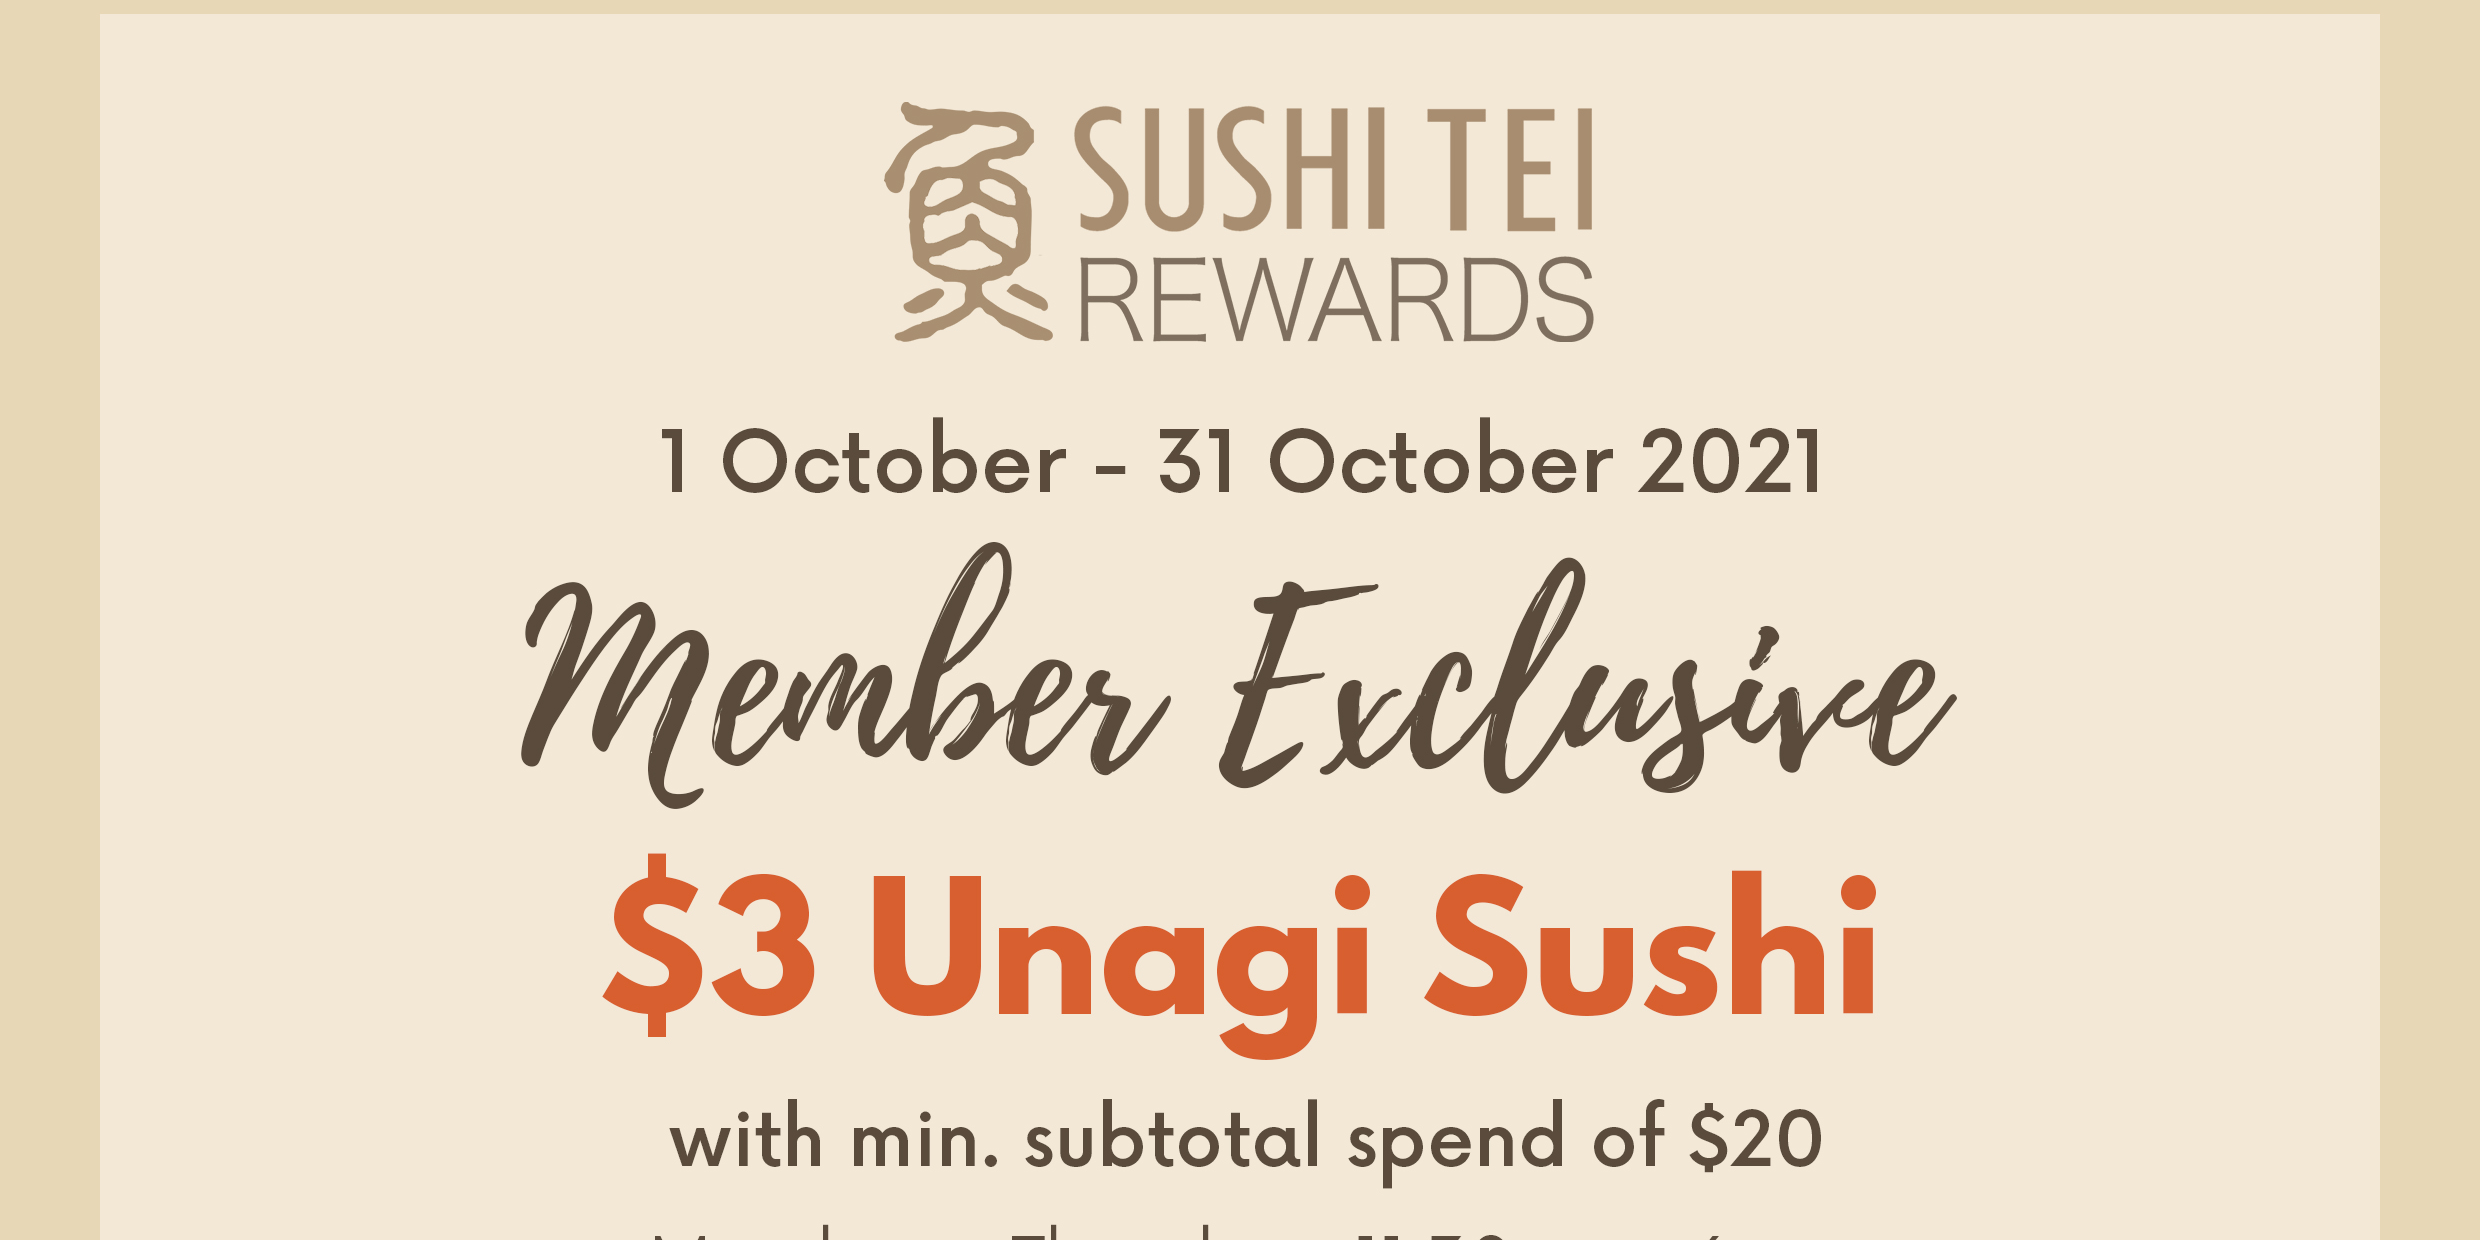 $3 Unagi Sushi for Sushi Tei Members from now till 31 October 2021 